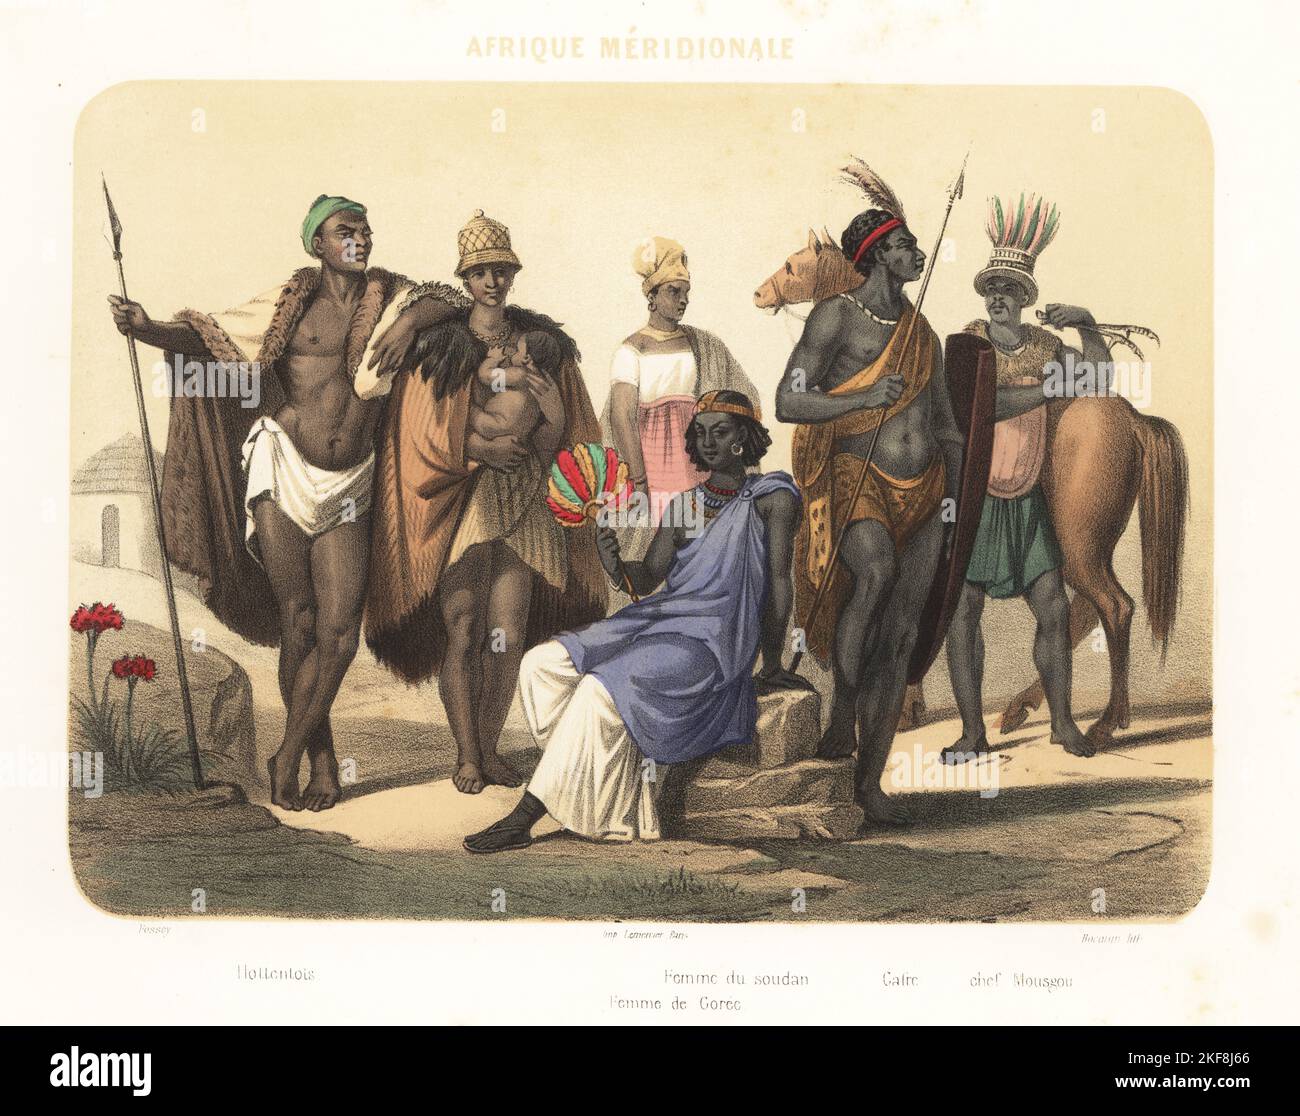 Costumes of Africa, 1858. Khoikhoi man and woman with sheepskin cloaks, woman from Sudan, Signare woman from the slave-trading Ile de Goree (Senegal), Zulu warrior with assegai spear and isihlangu cow-hide shield, and Musgum chief in feather headdress with ostrich bones (Cameroon). Hottentots, femme de Soudan, femme de Goree, Caffre, chef Mousgou. Handcoloured and sepia-tinted lithograph by Jean-Adolphe Bocquin after an illustration by Felix Fossey from Elisabeth Muller (pseudonym of Leonie Bedelet)’s Le Monde en Estampes, The World in Prints, Amadee Bedelet, Paris, 1858. Stock Photo